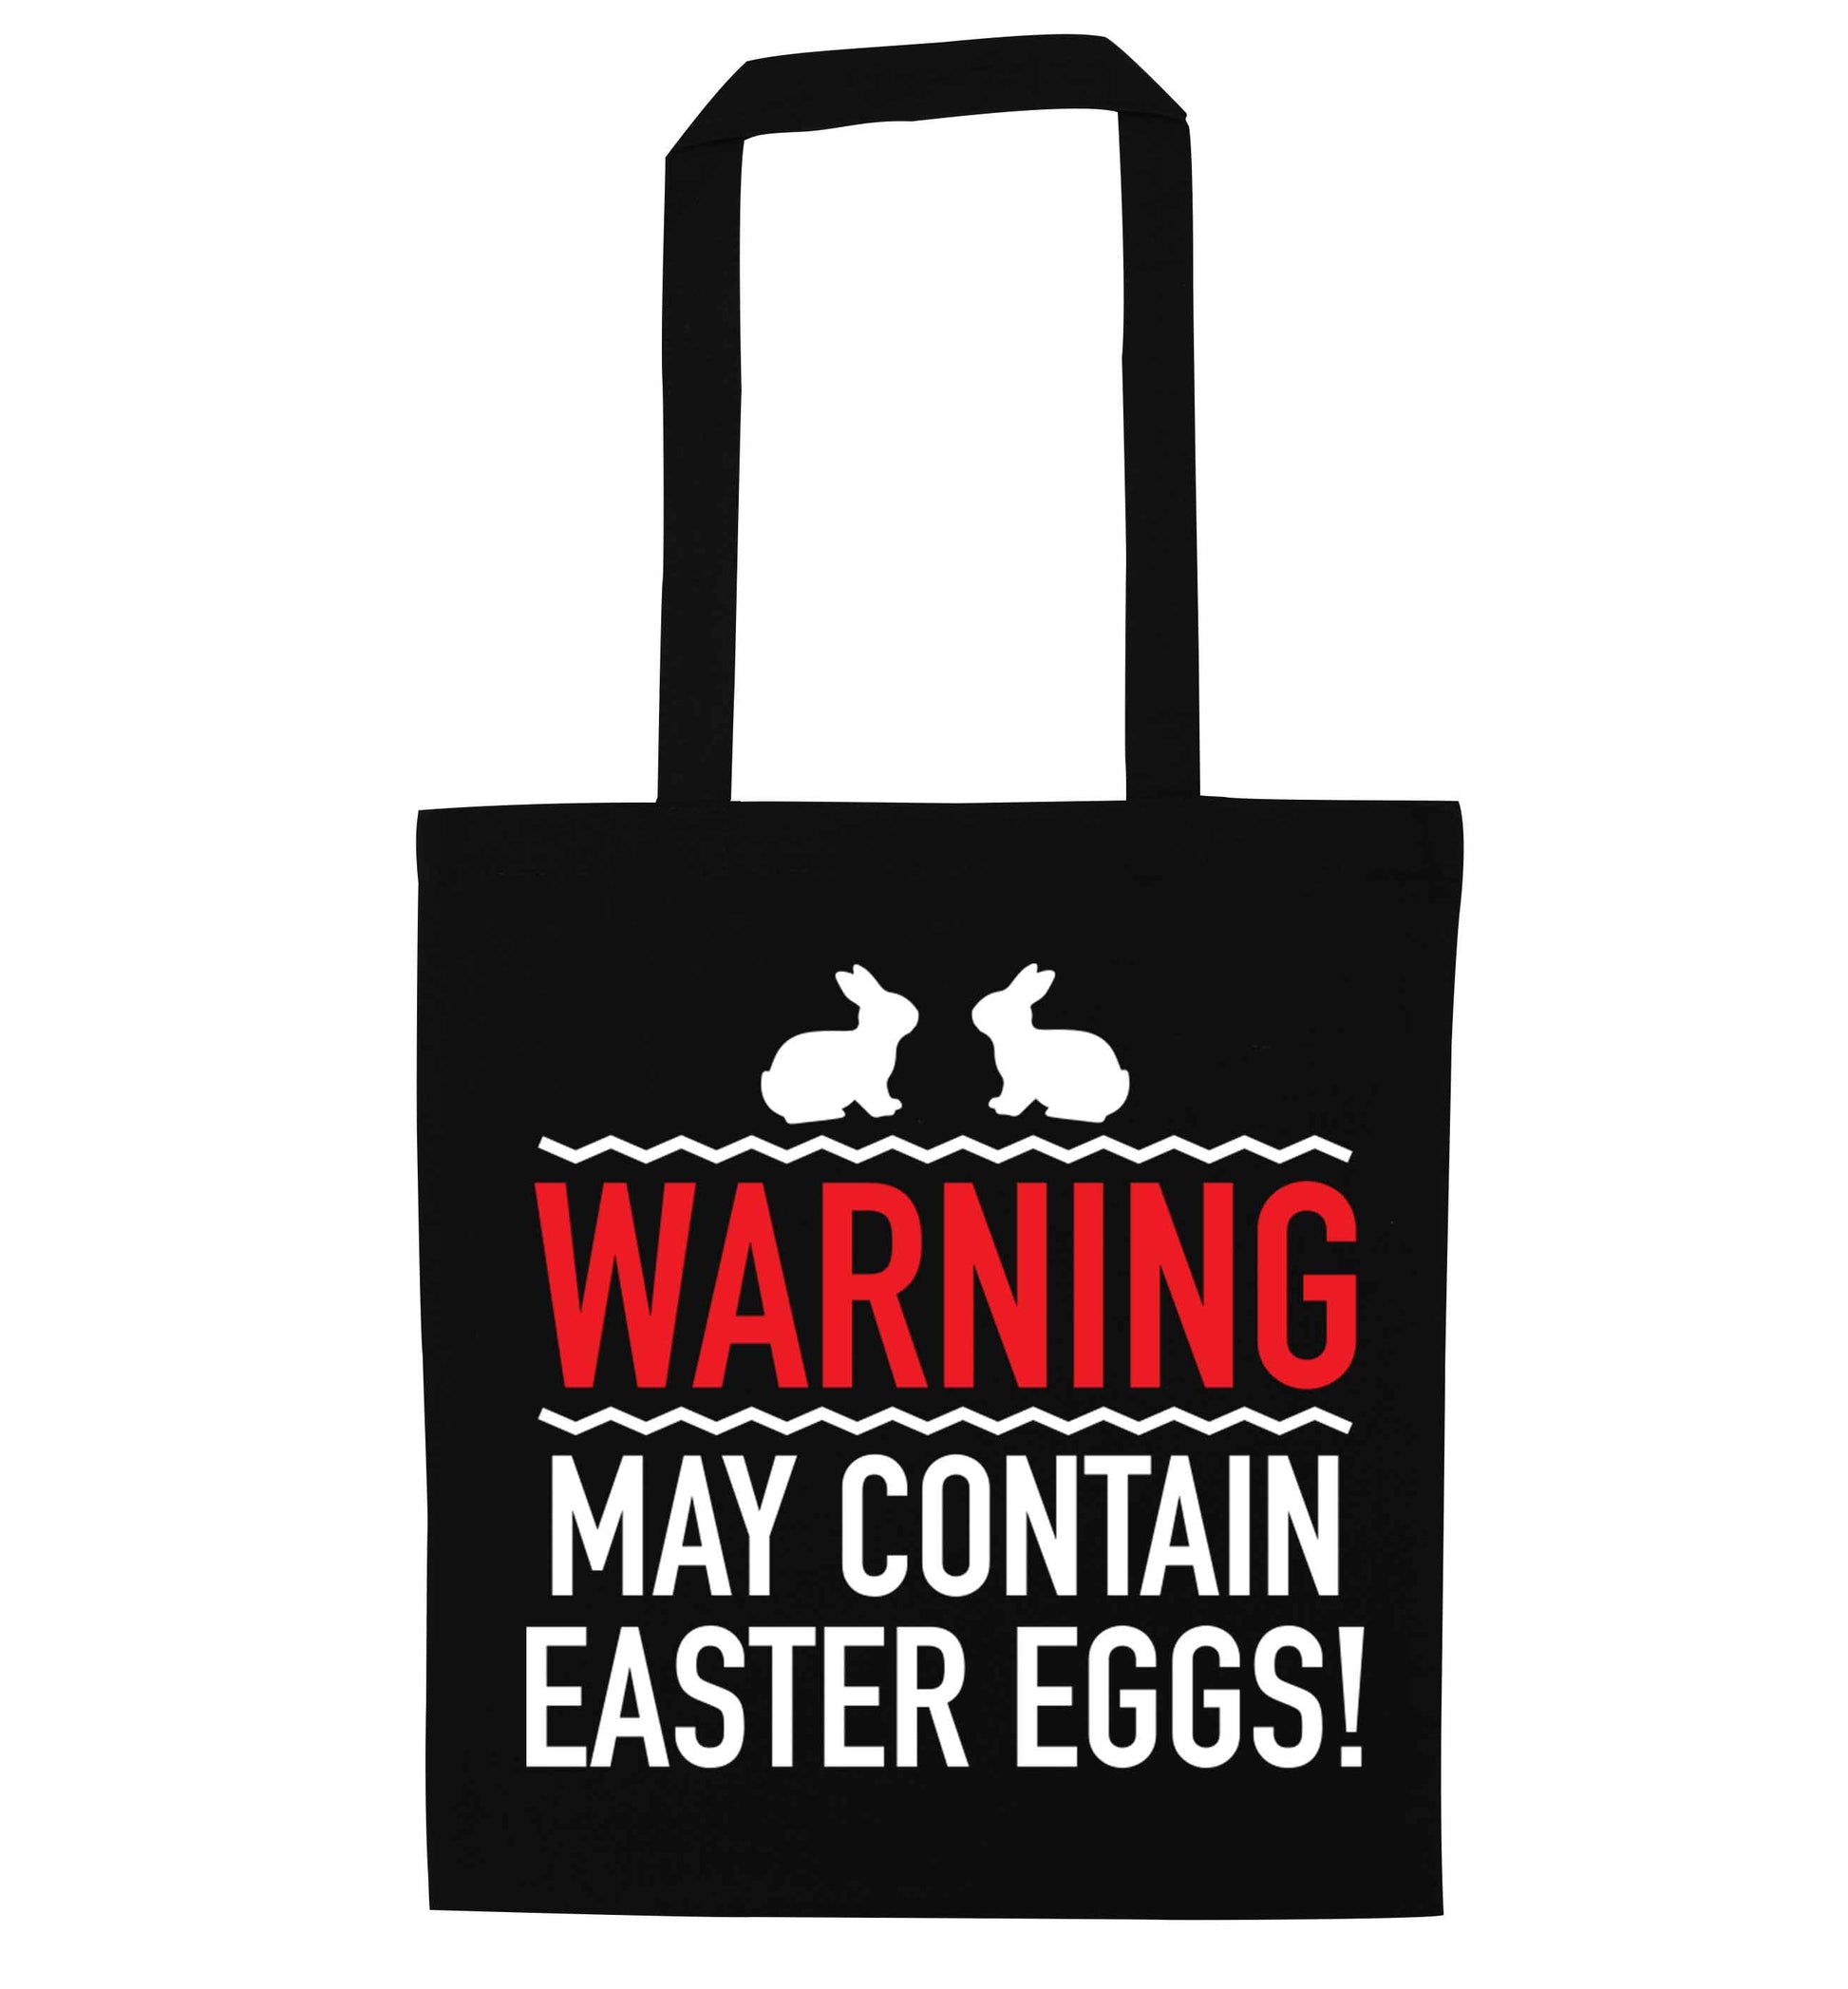 Warning may contain Easter eggs black tote bag